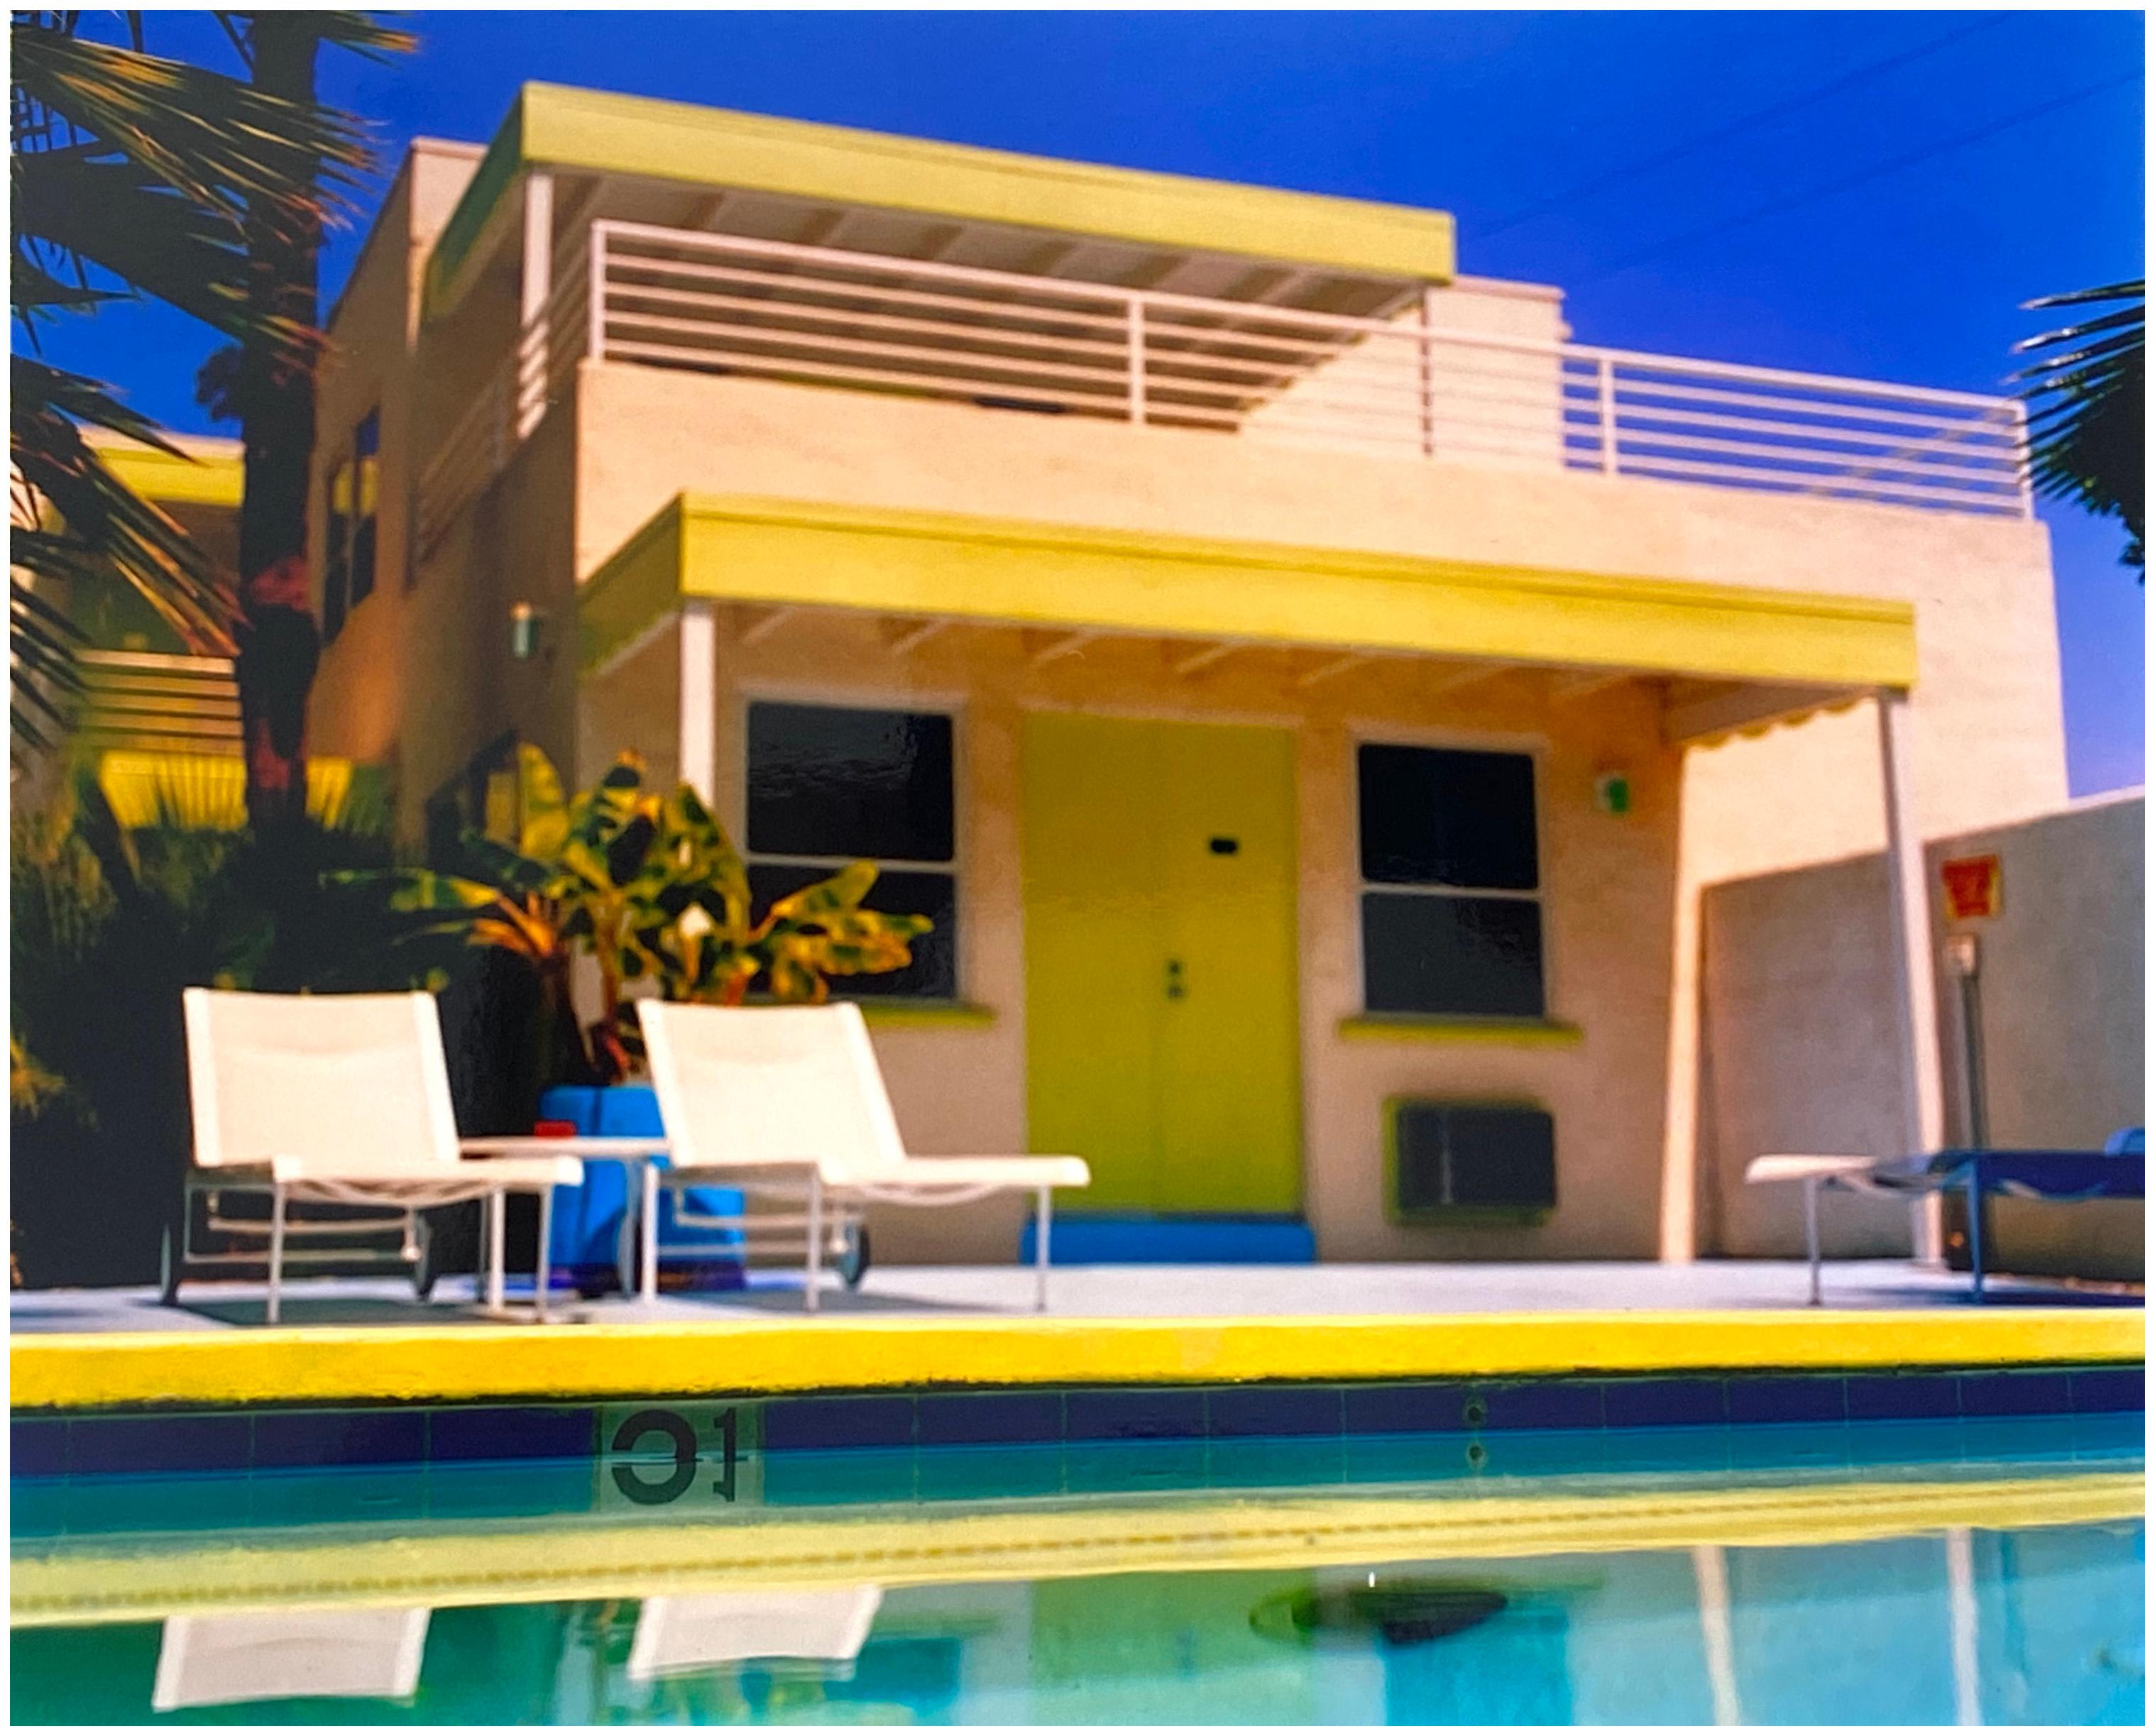 Richard Heeps Landscape Photograph - Palm Springs Pool Side I, California - American Architecture Color Photography